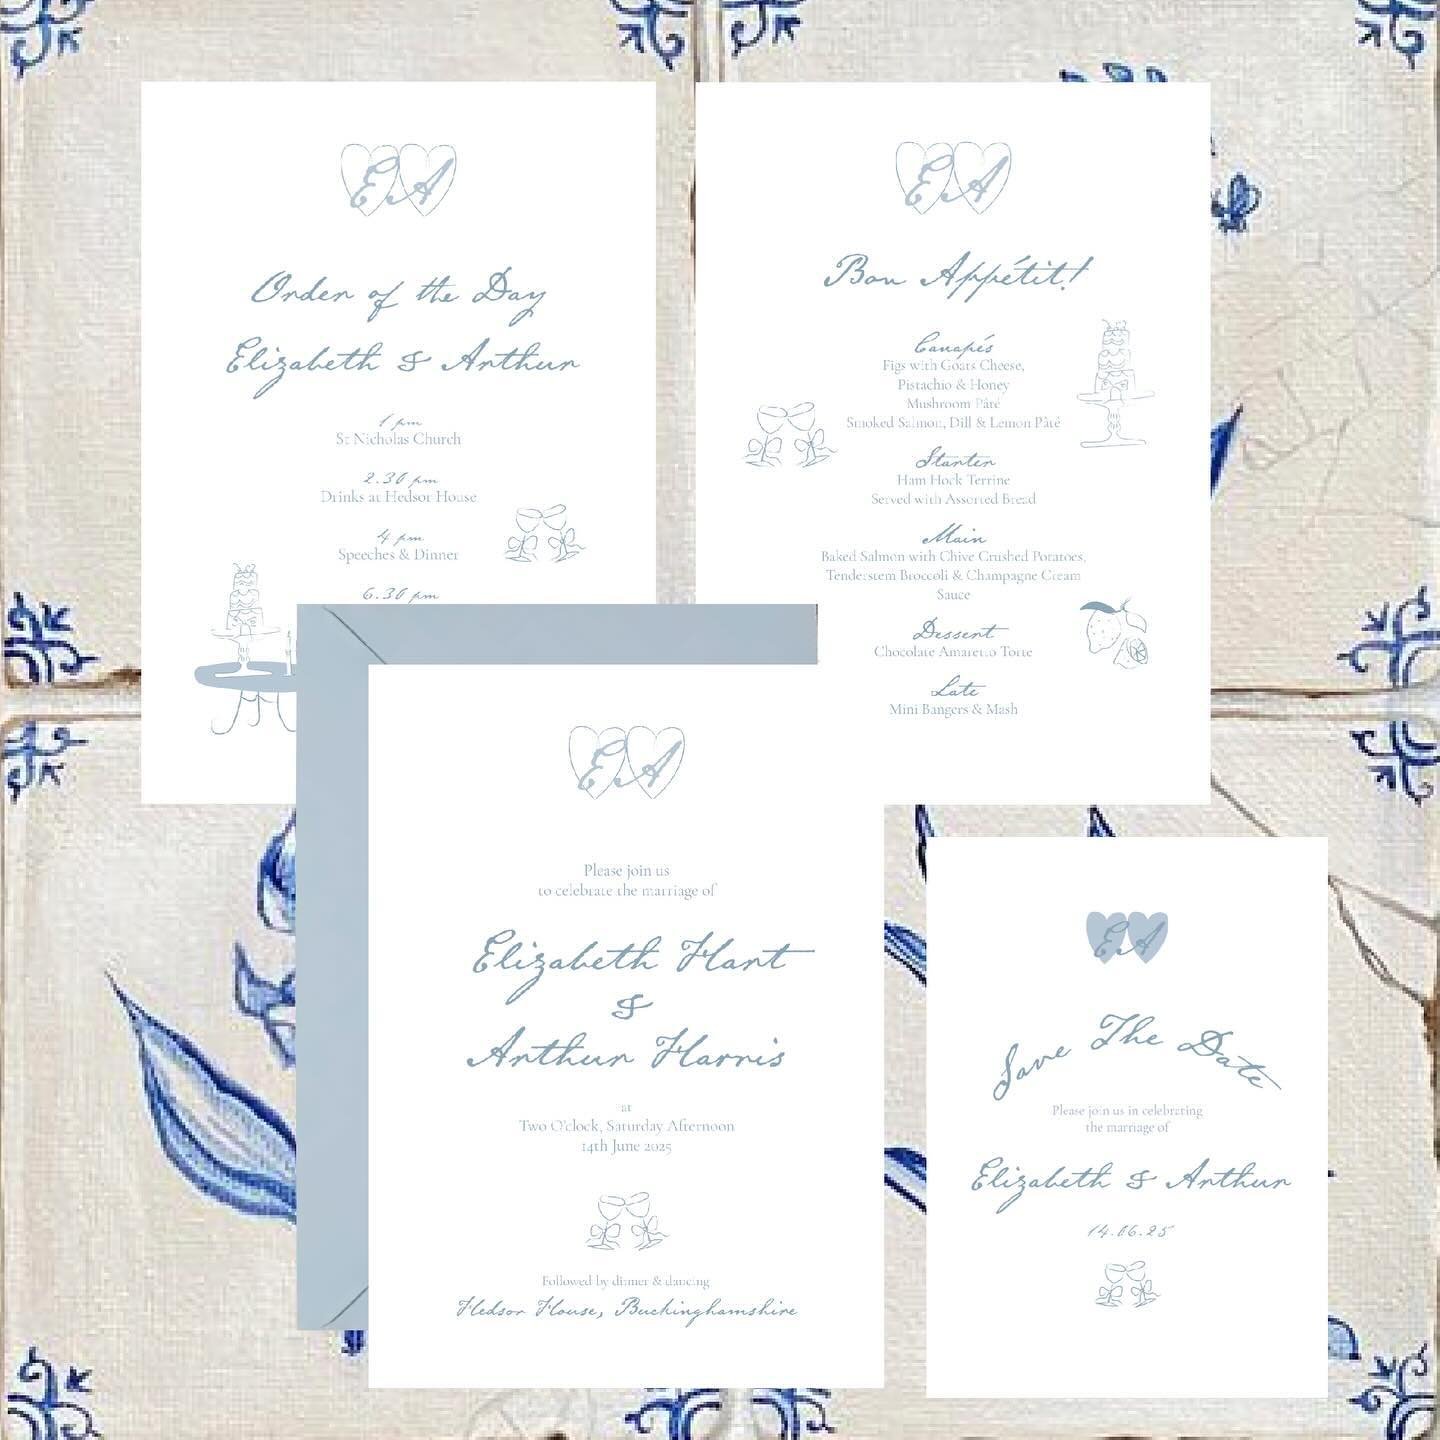 The Something Blue Wedding Stationery Set 🤍

This set can be personalised to tell your wedding story. With an optional heart shaped Save The Date and pastel blue envelopes, this set is cute and chic for a summer wedding.

Head to our website to enqu